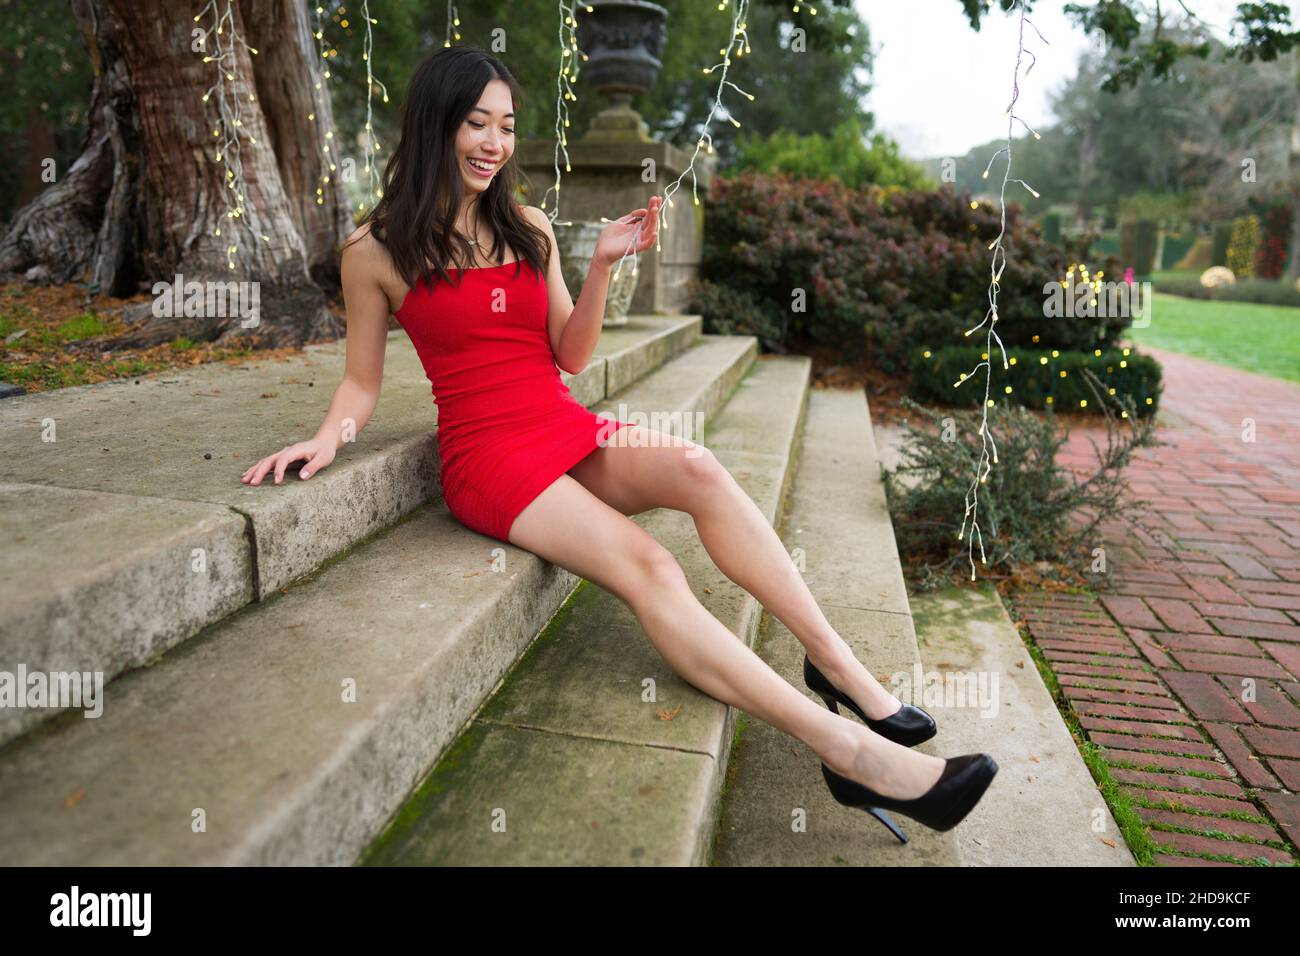 Young East Asian Woman in Red Party/Holiday Dress Lounging on Steps Playing  with Lights Stock Photo - Alamy